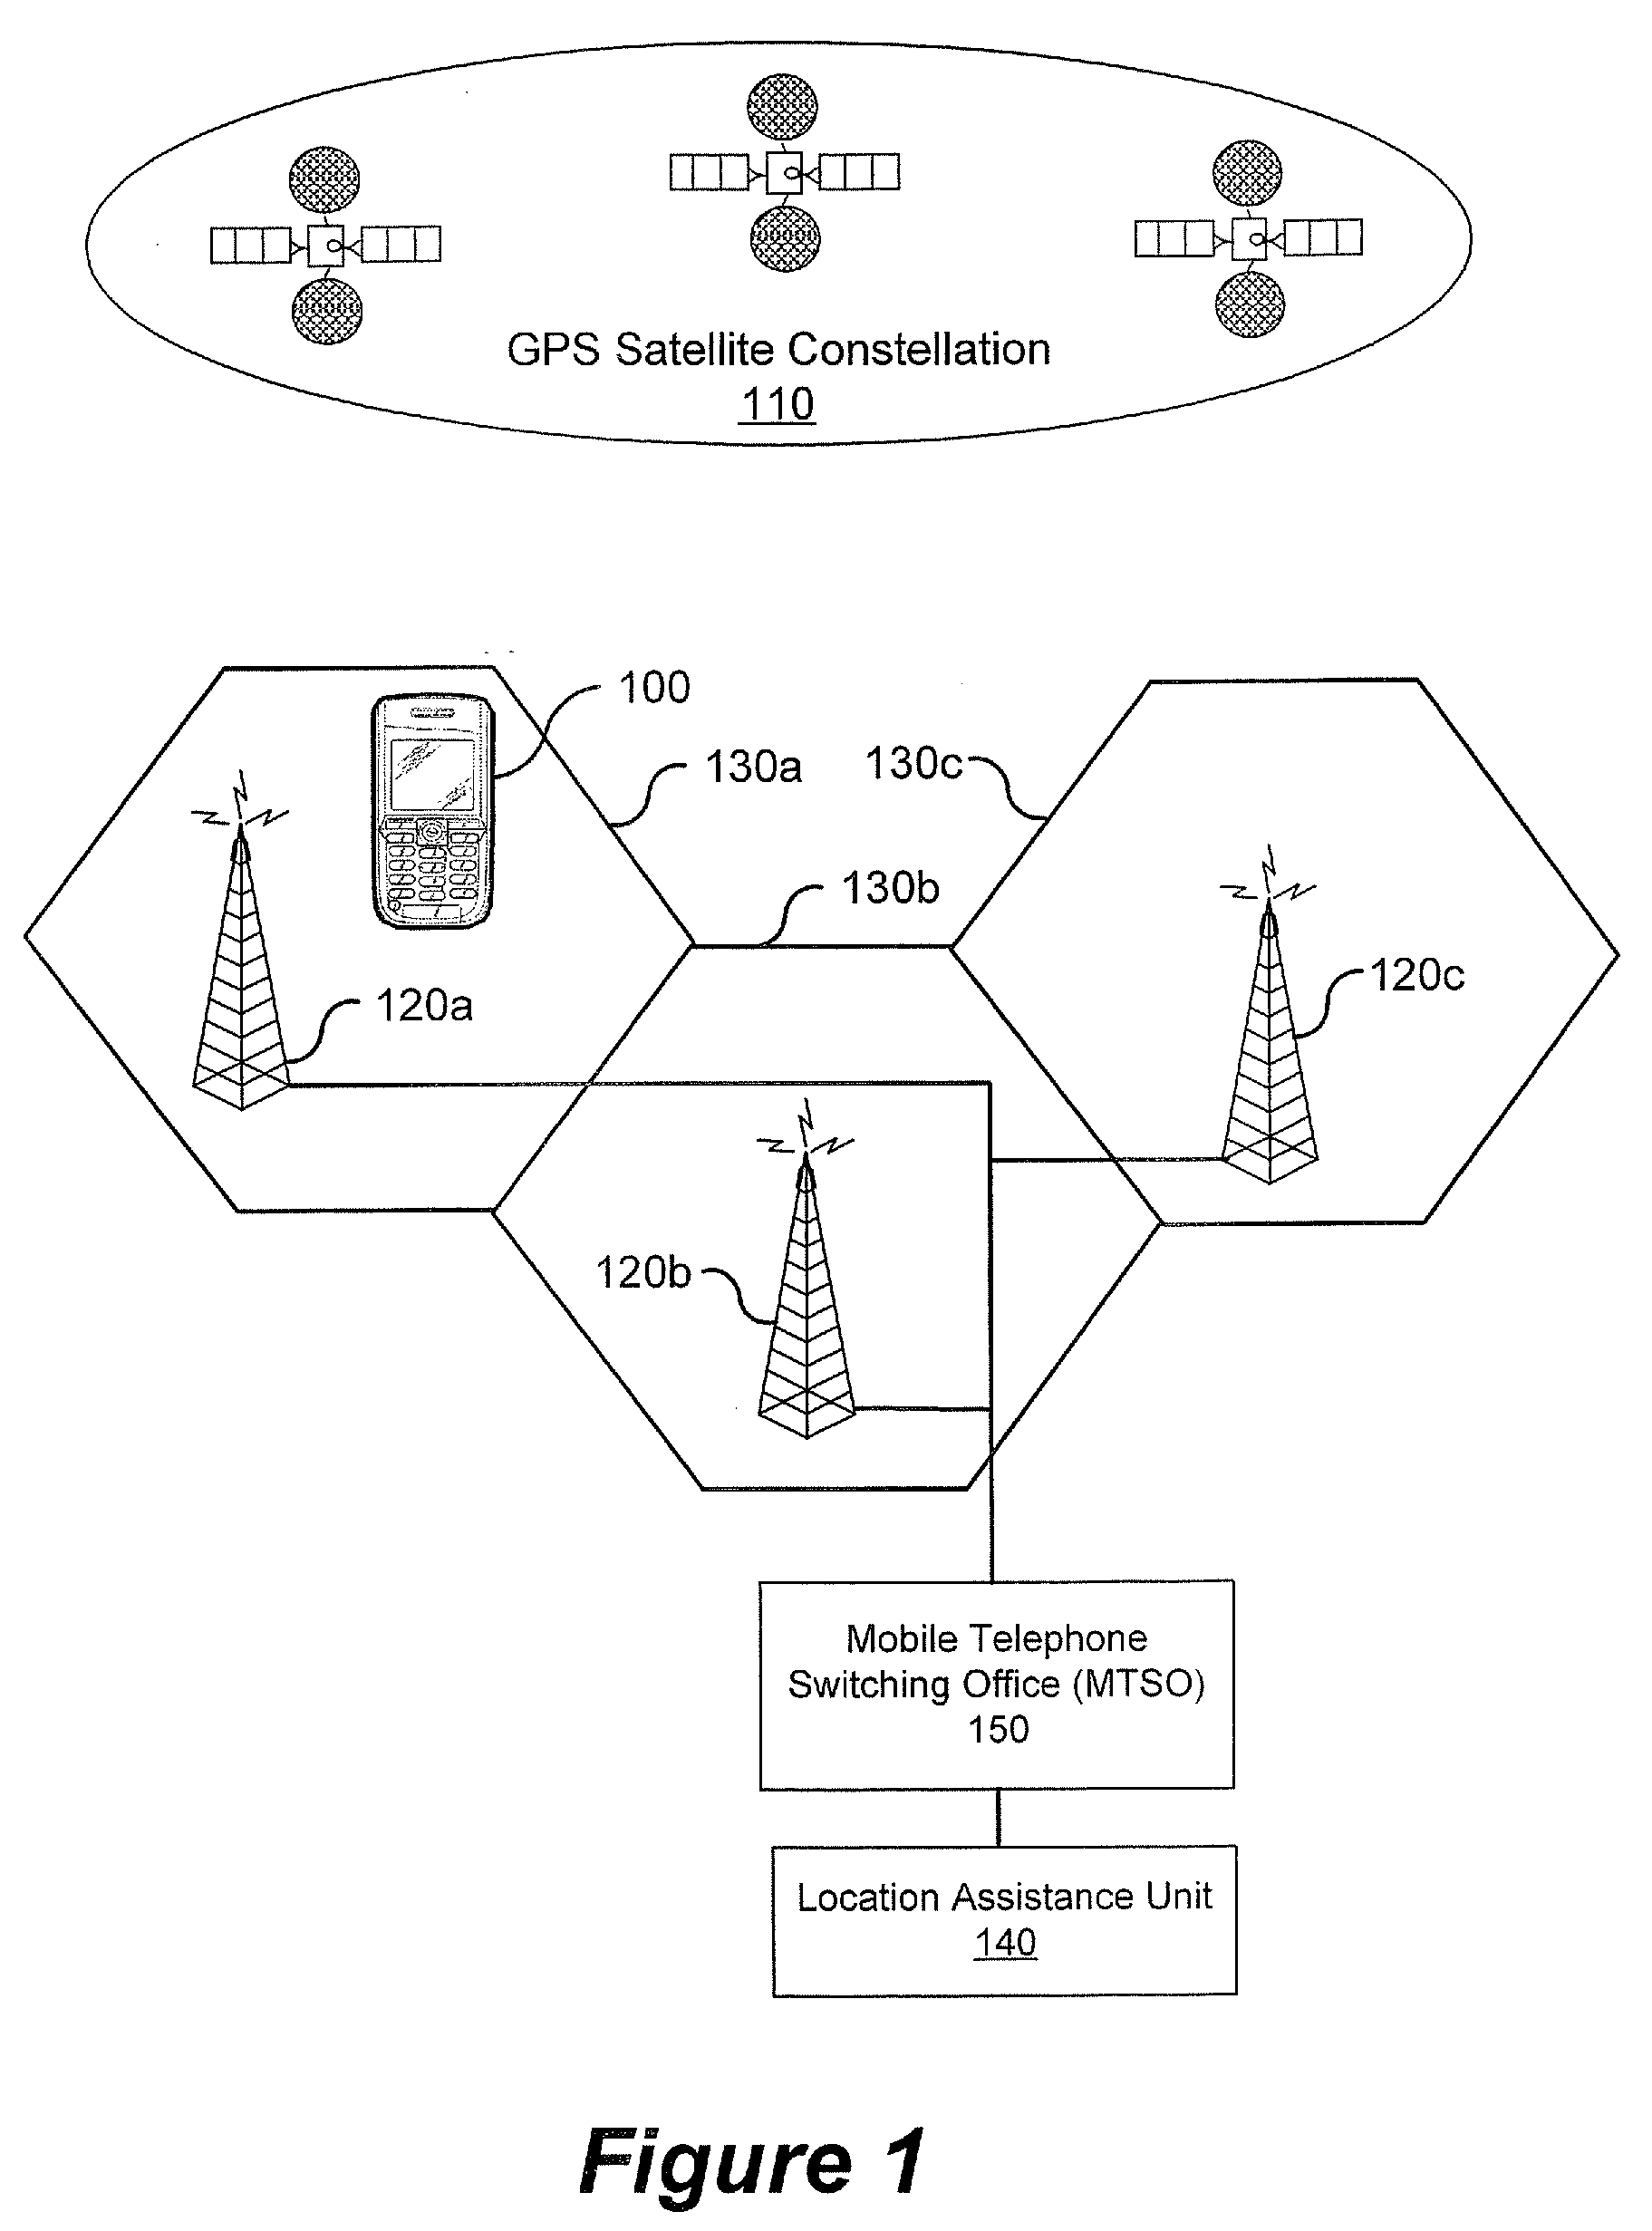 Mobile terminals and methods for regulating power-on/off of a GPS positioning circuit